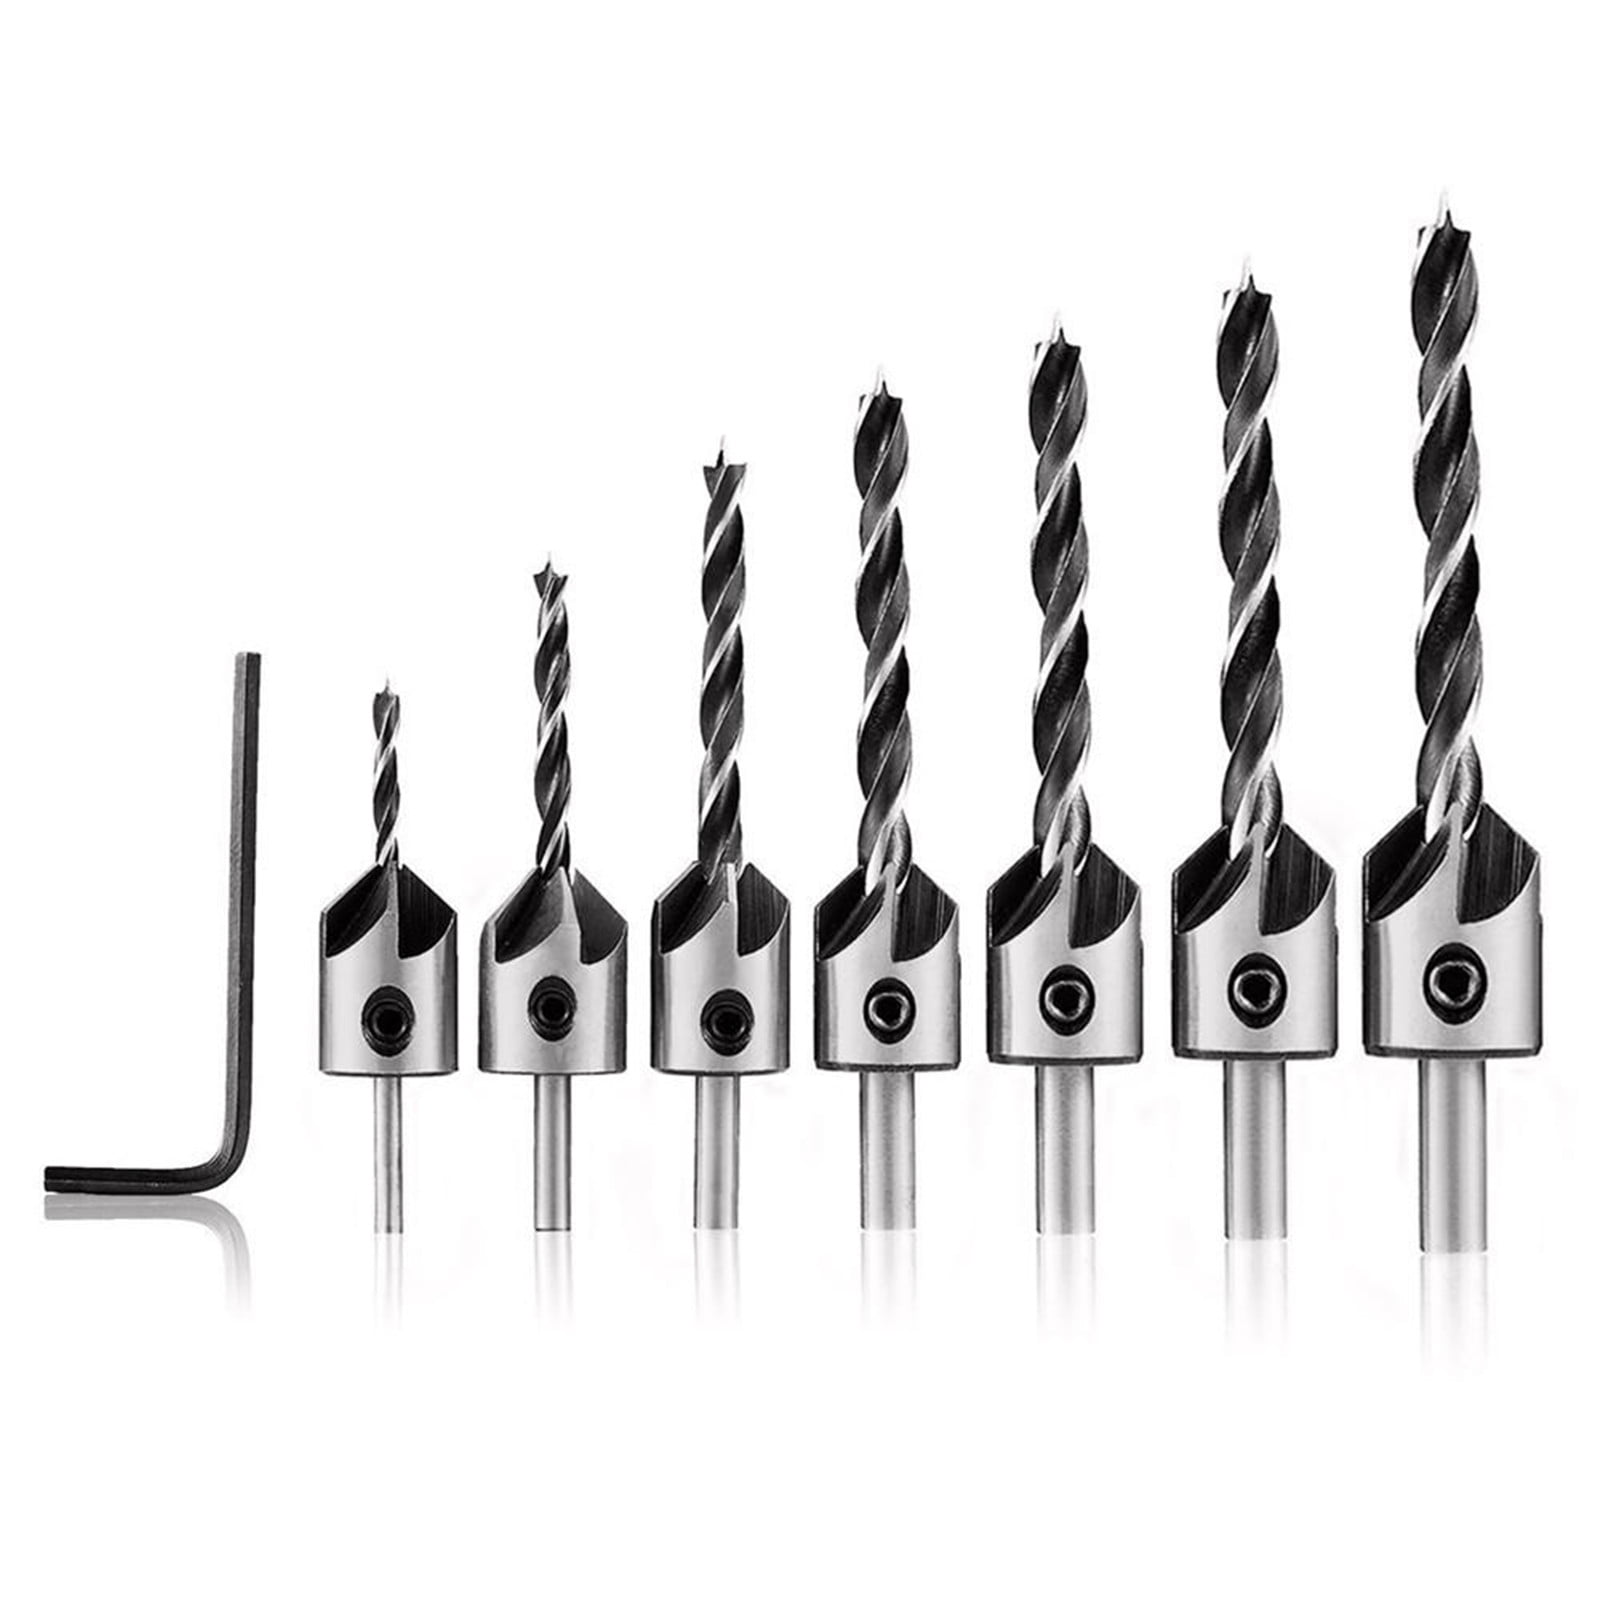 7pcs Adjustable Countersink Bit Set Tapered Drill Hole Digger Woodworking 